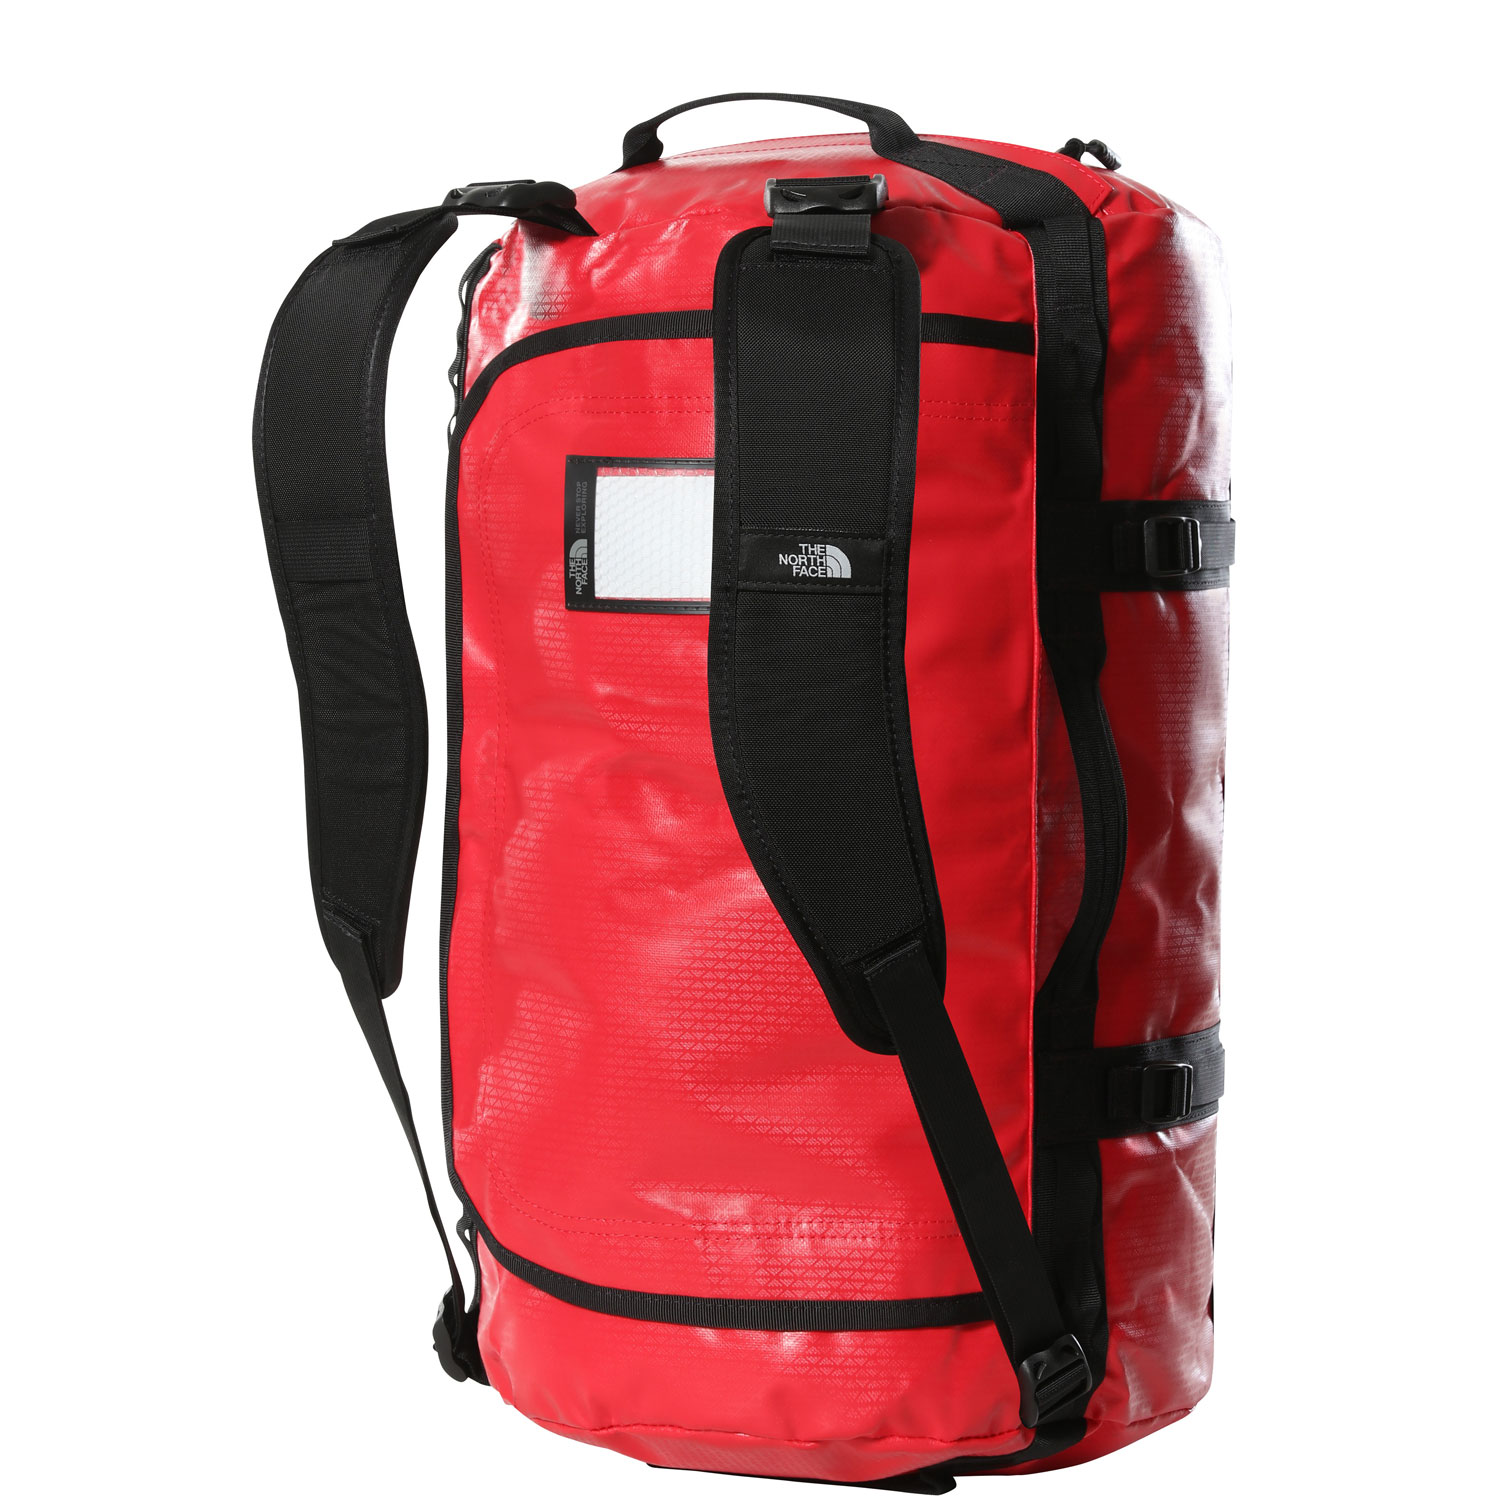 The North Face Reise/-Sporttasche Rucksack Base Camp Duffel S Red/Black